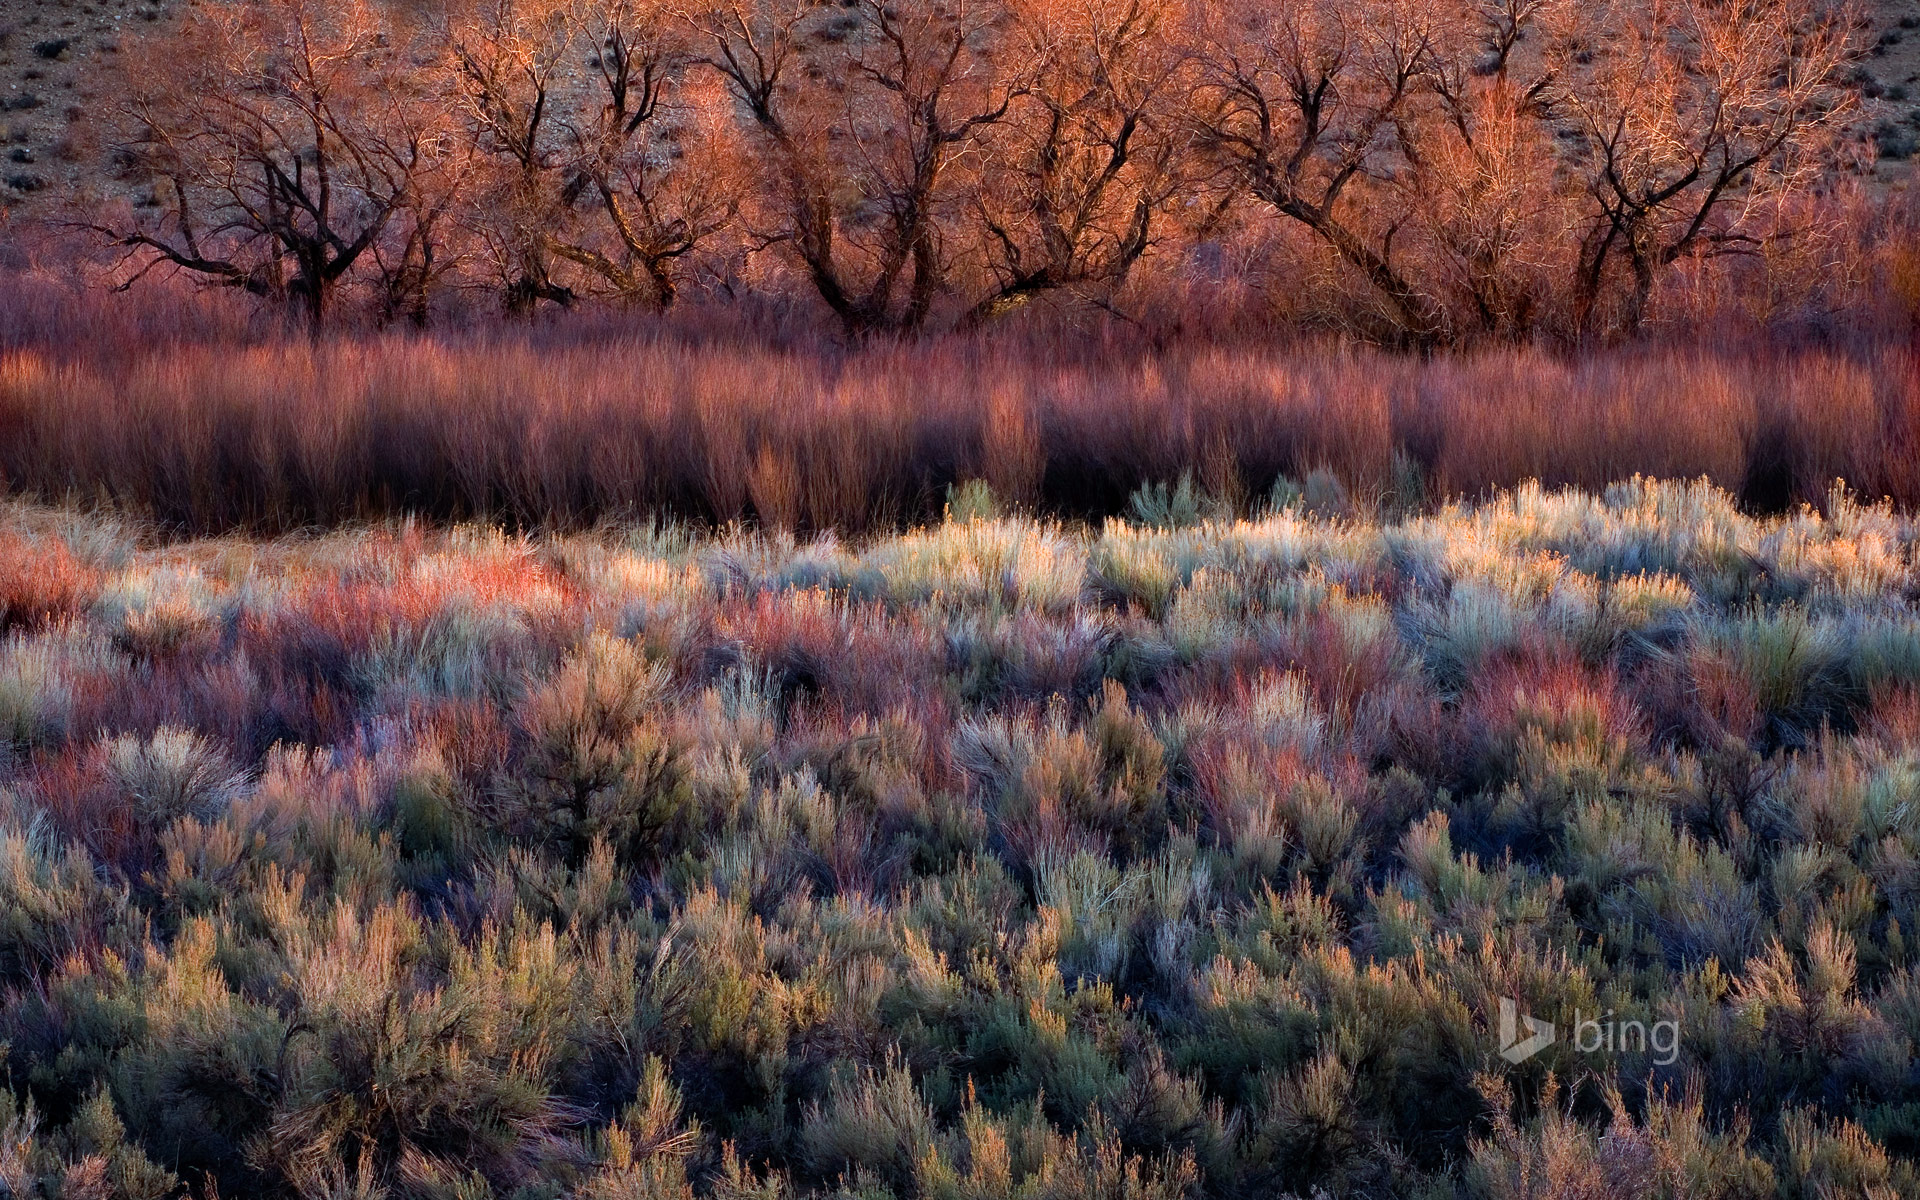 Foliage, including cottonwoods, willows, sage, and rabbitbrush, in California's Owens Valley